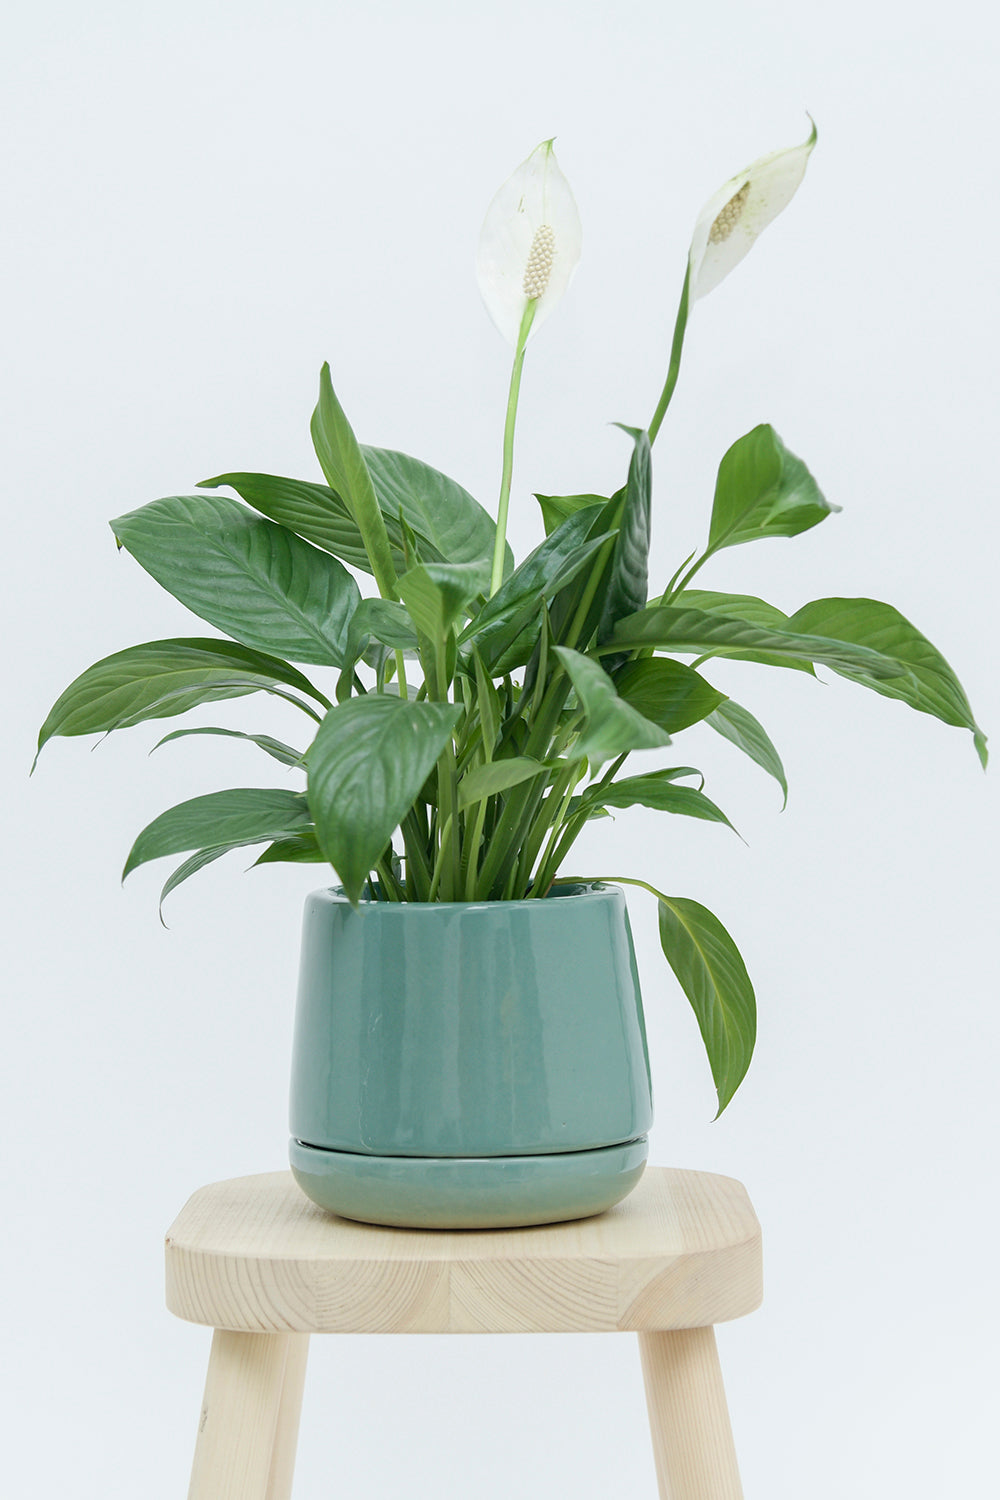 Extra Small size Monsoon Medley ceramic planter in Aqua Green color with Peace Lilly plant placed on the stool.